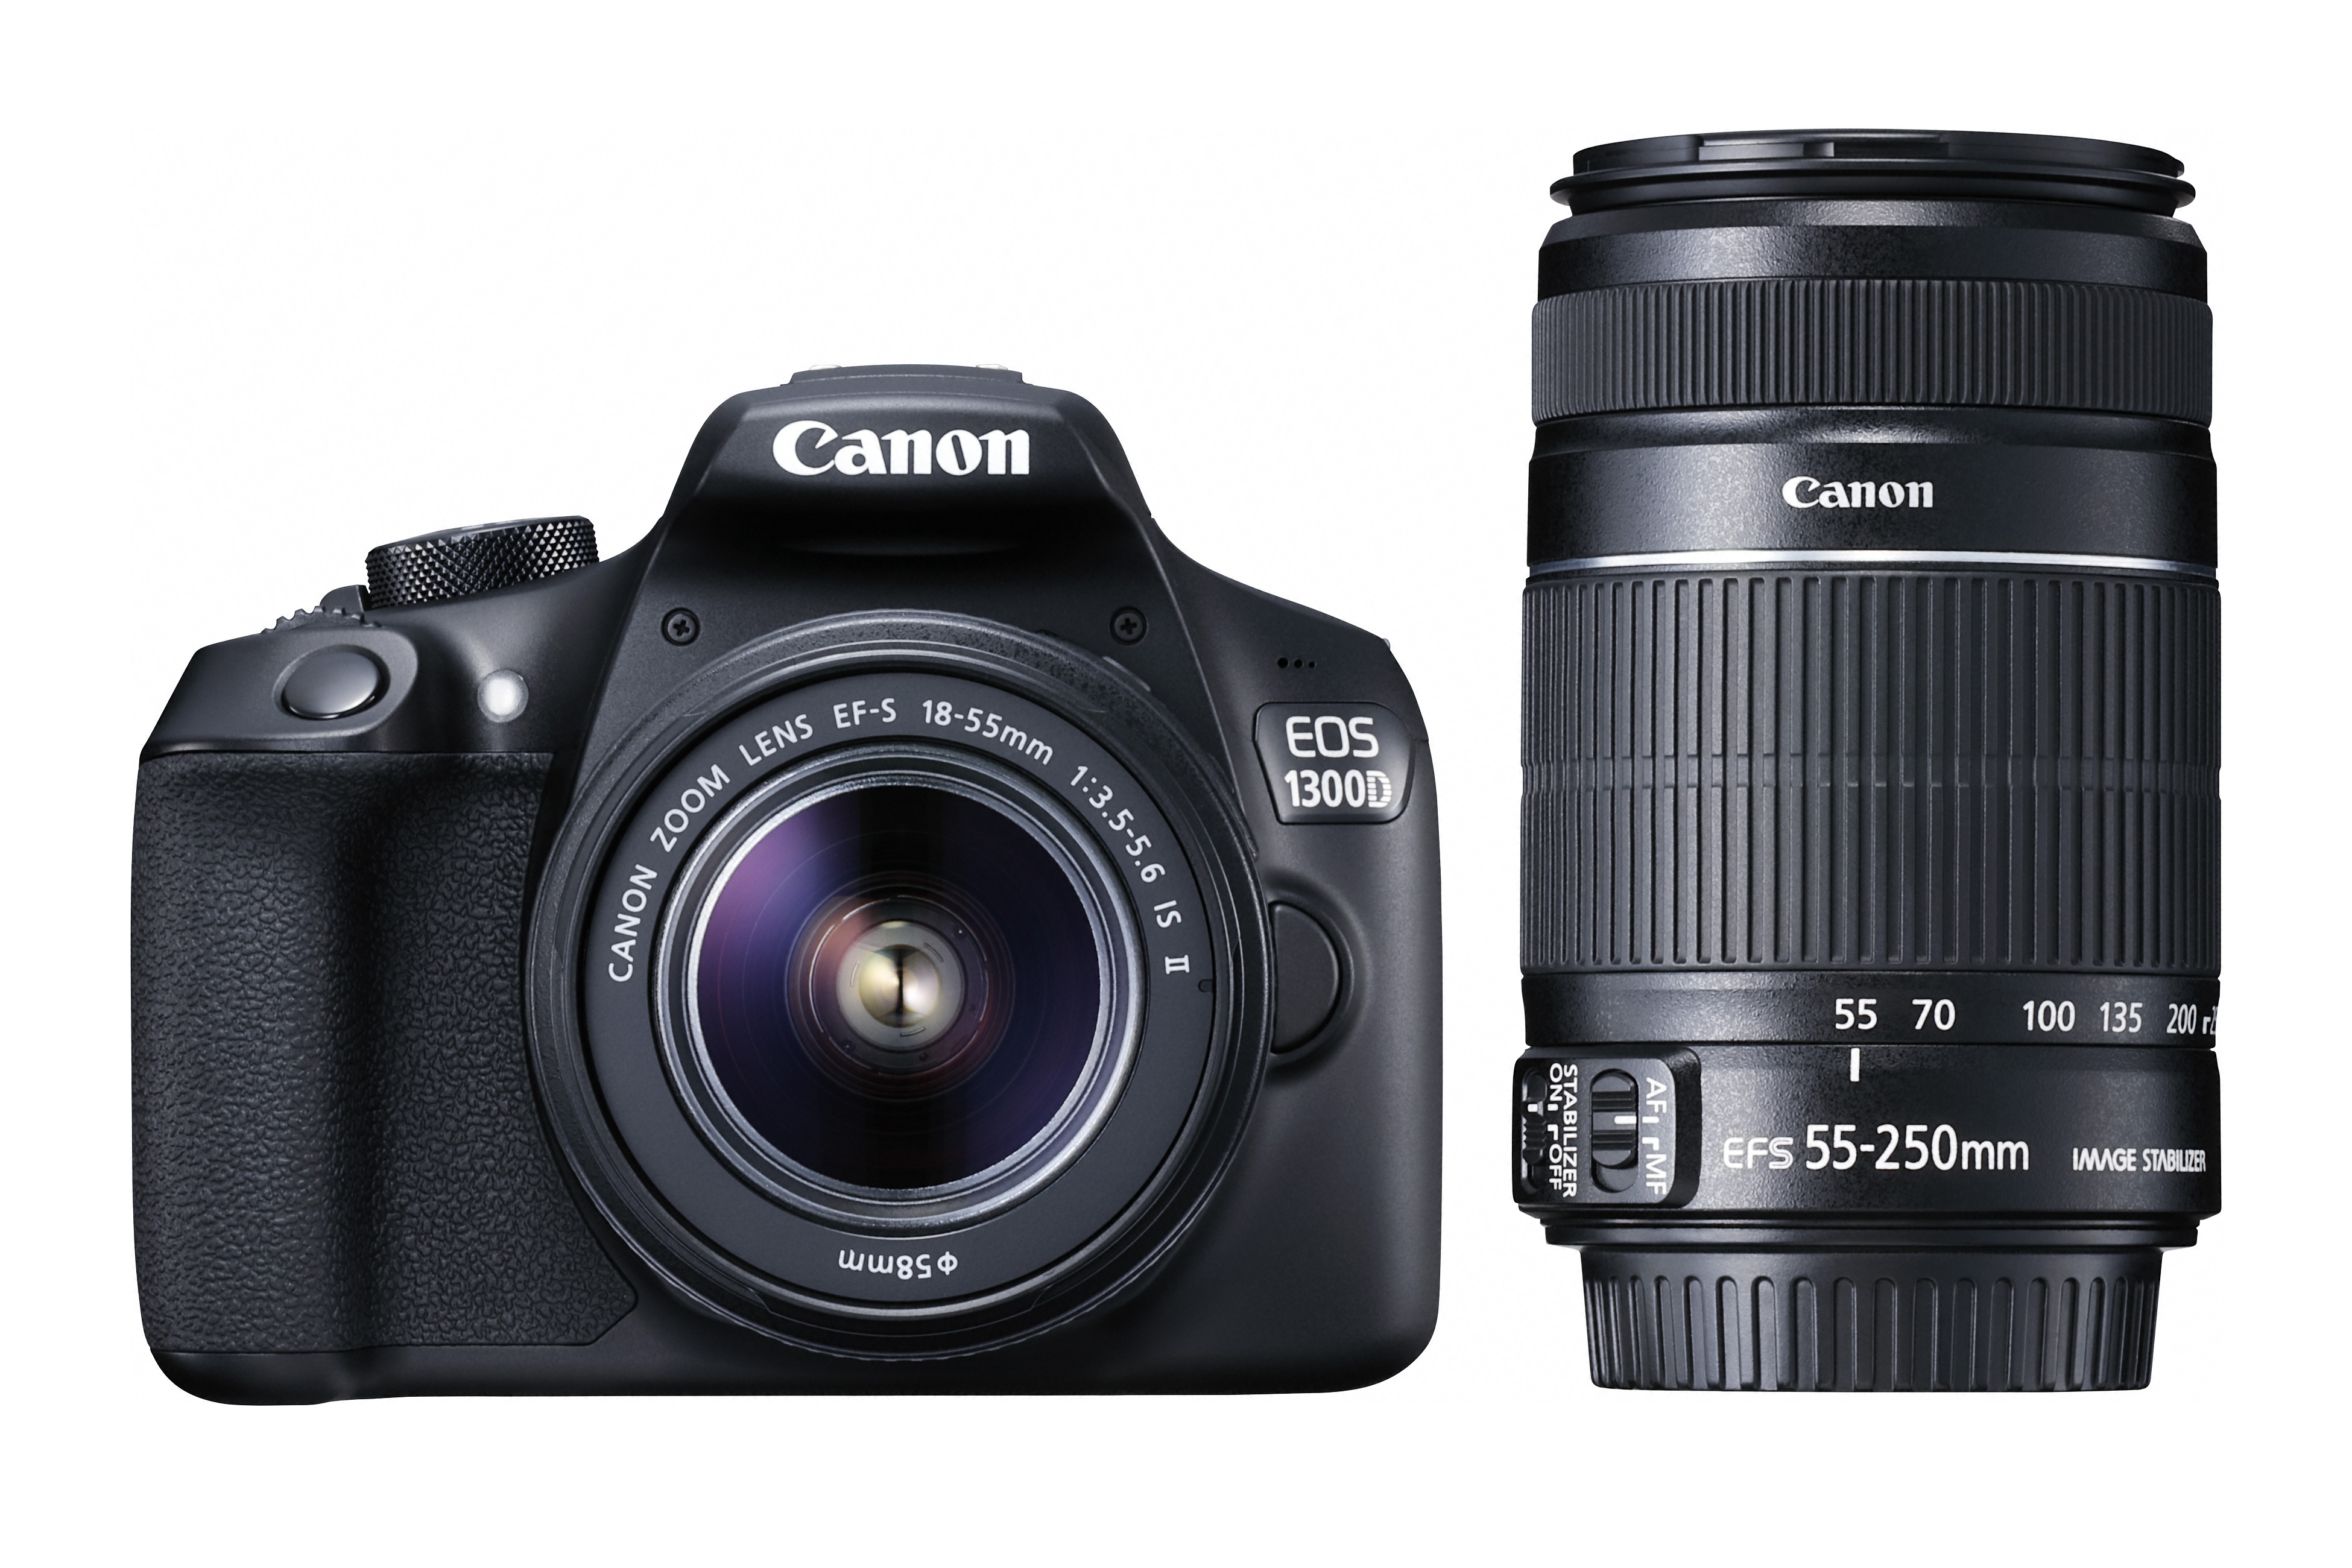 Canon EOS 1300D, The camera for the Smartphone generation